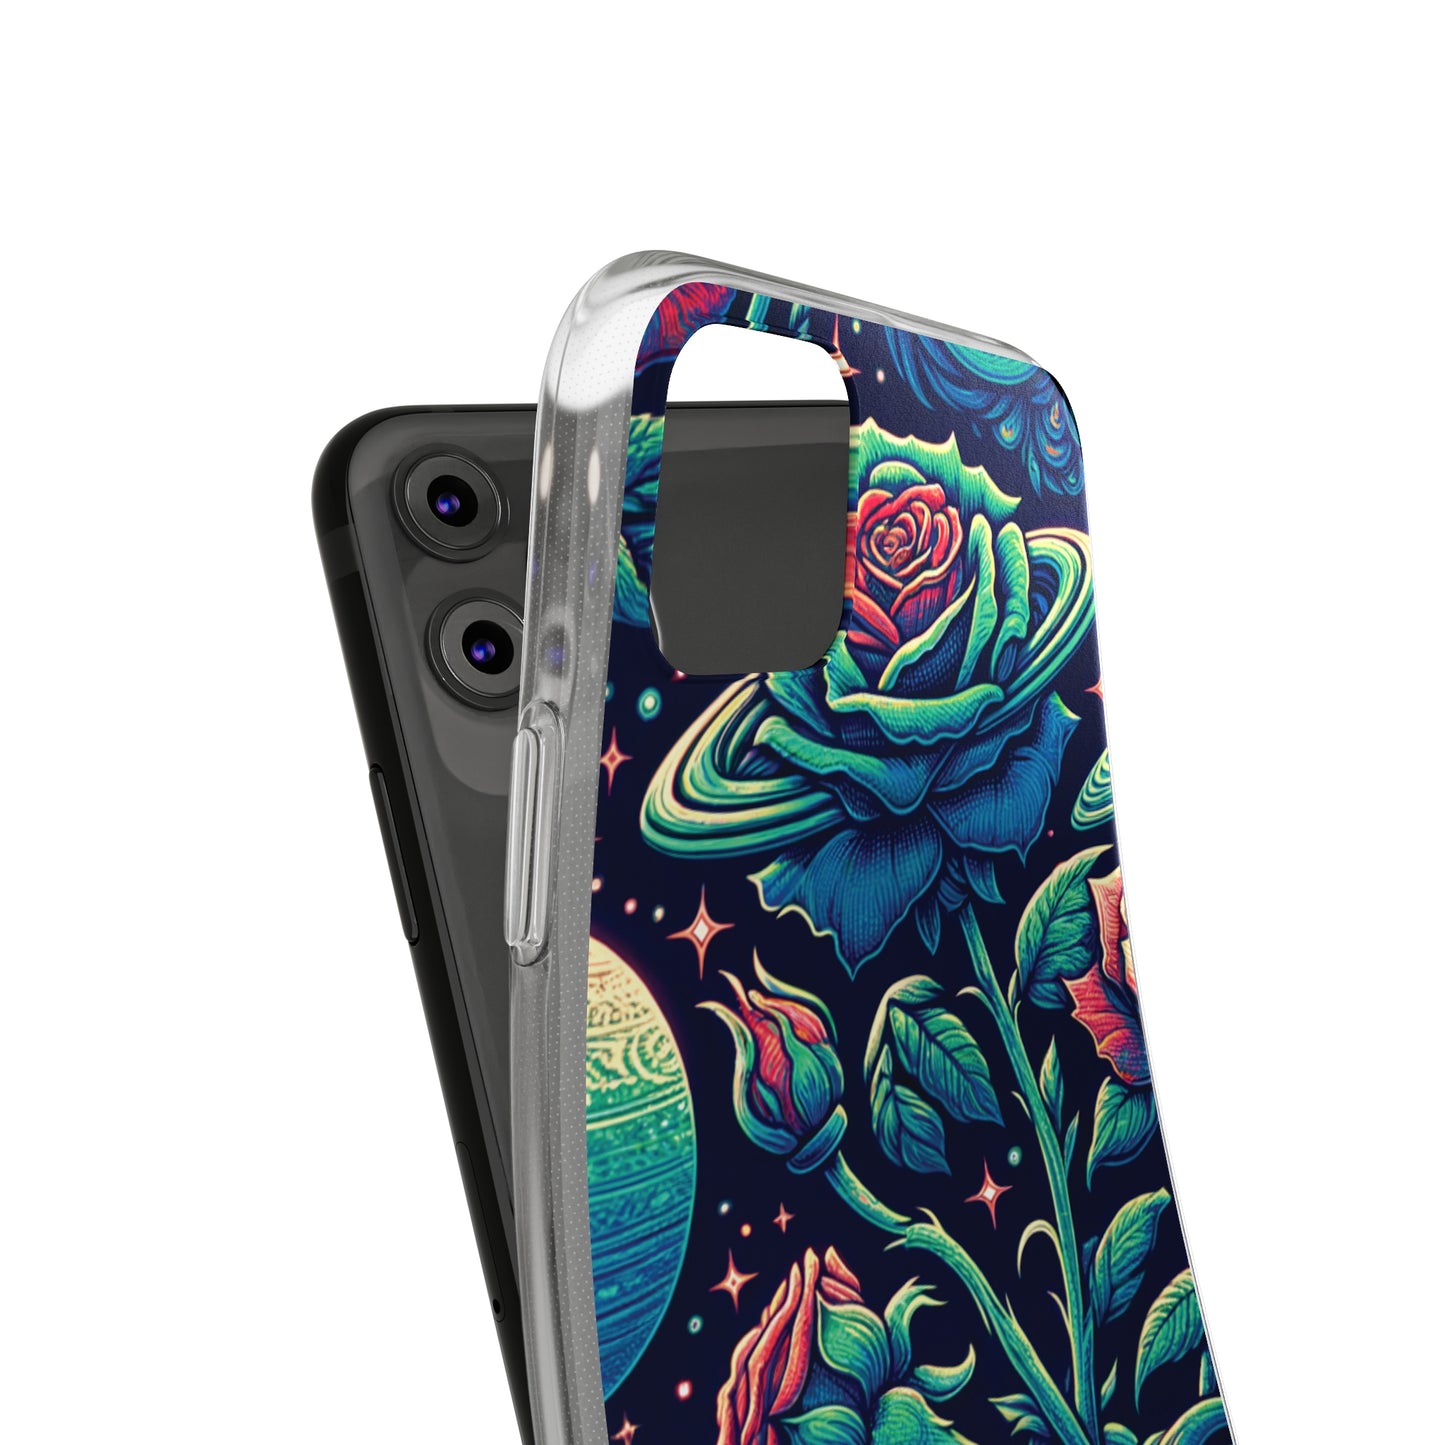 Space roses silicon phone case